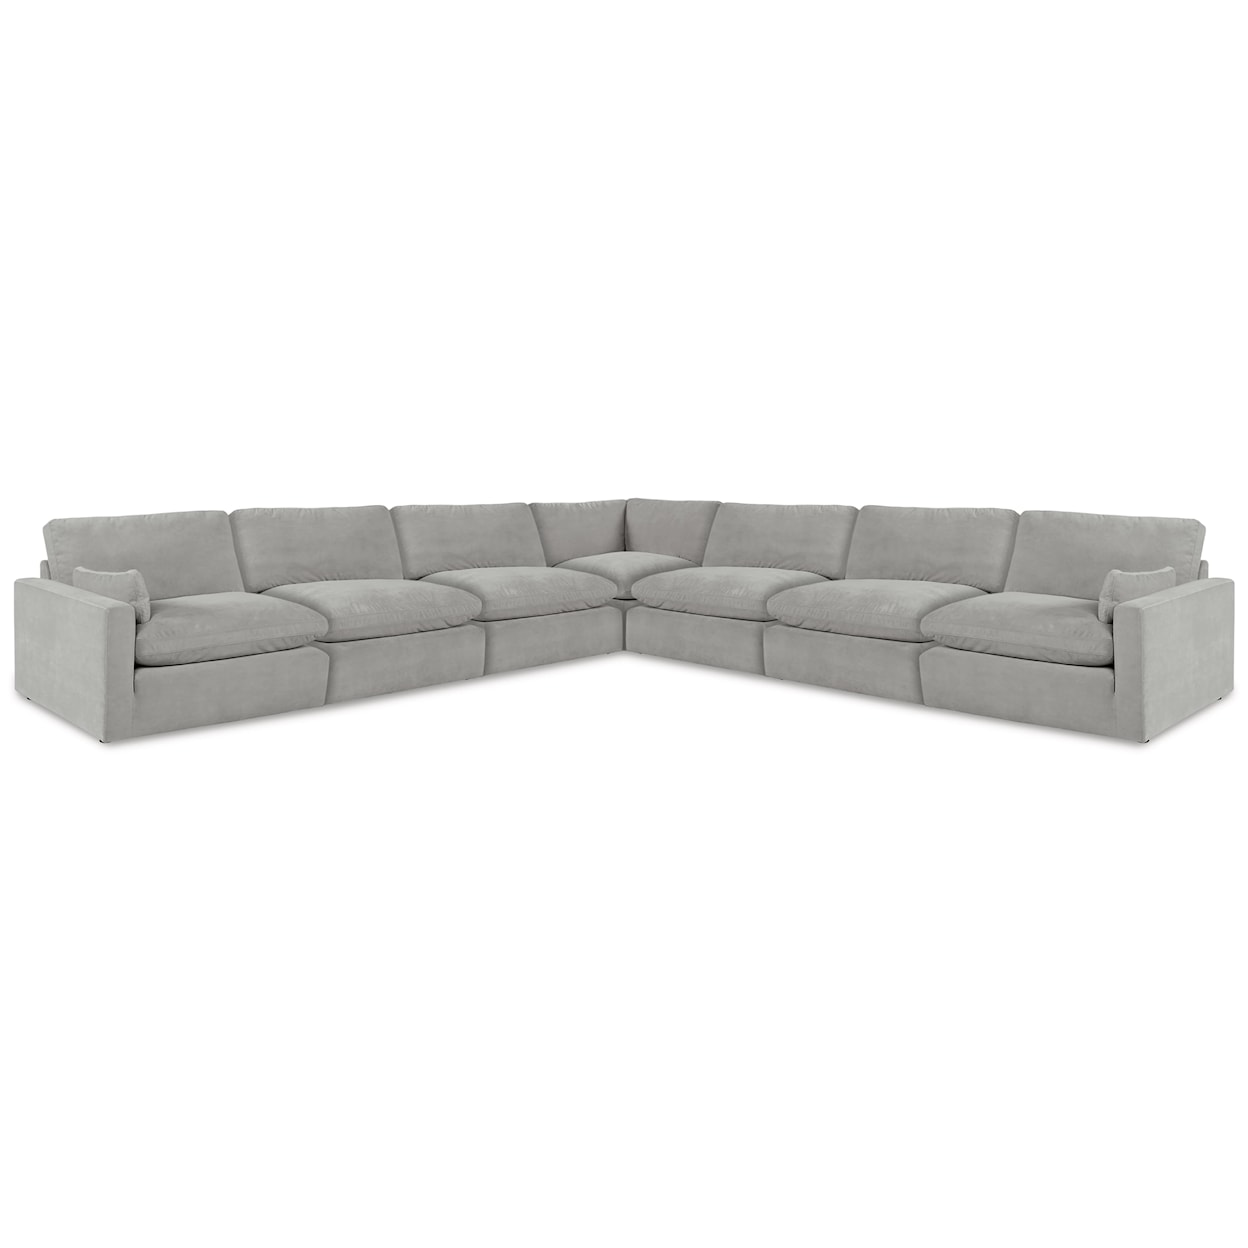 Benchcraft Sophie 7-Piece Sectional